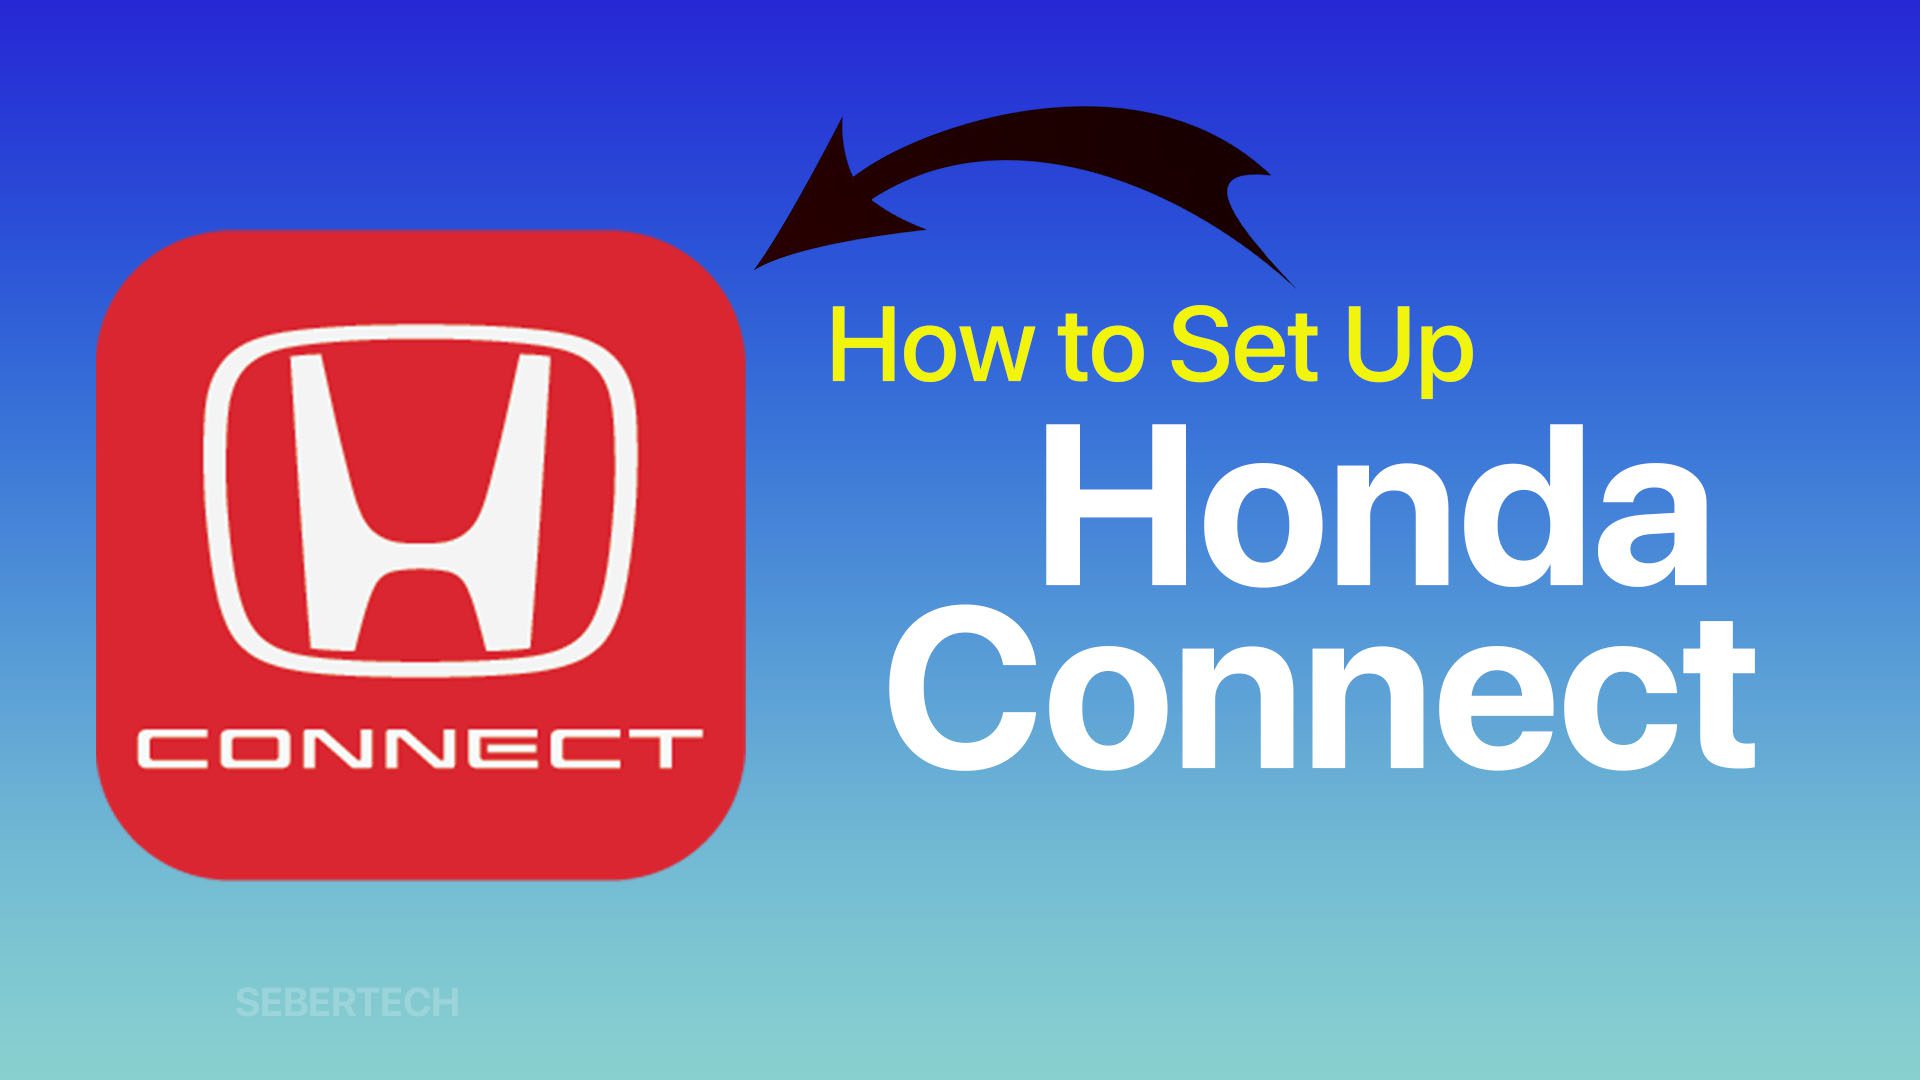 How to Set Up Honda Connect